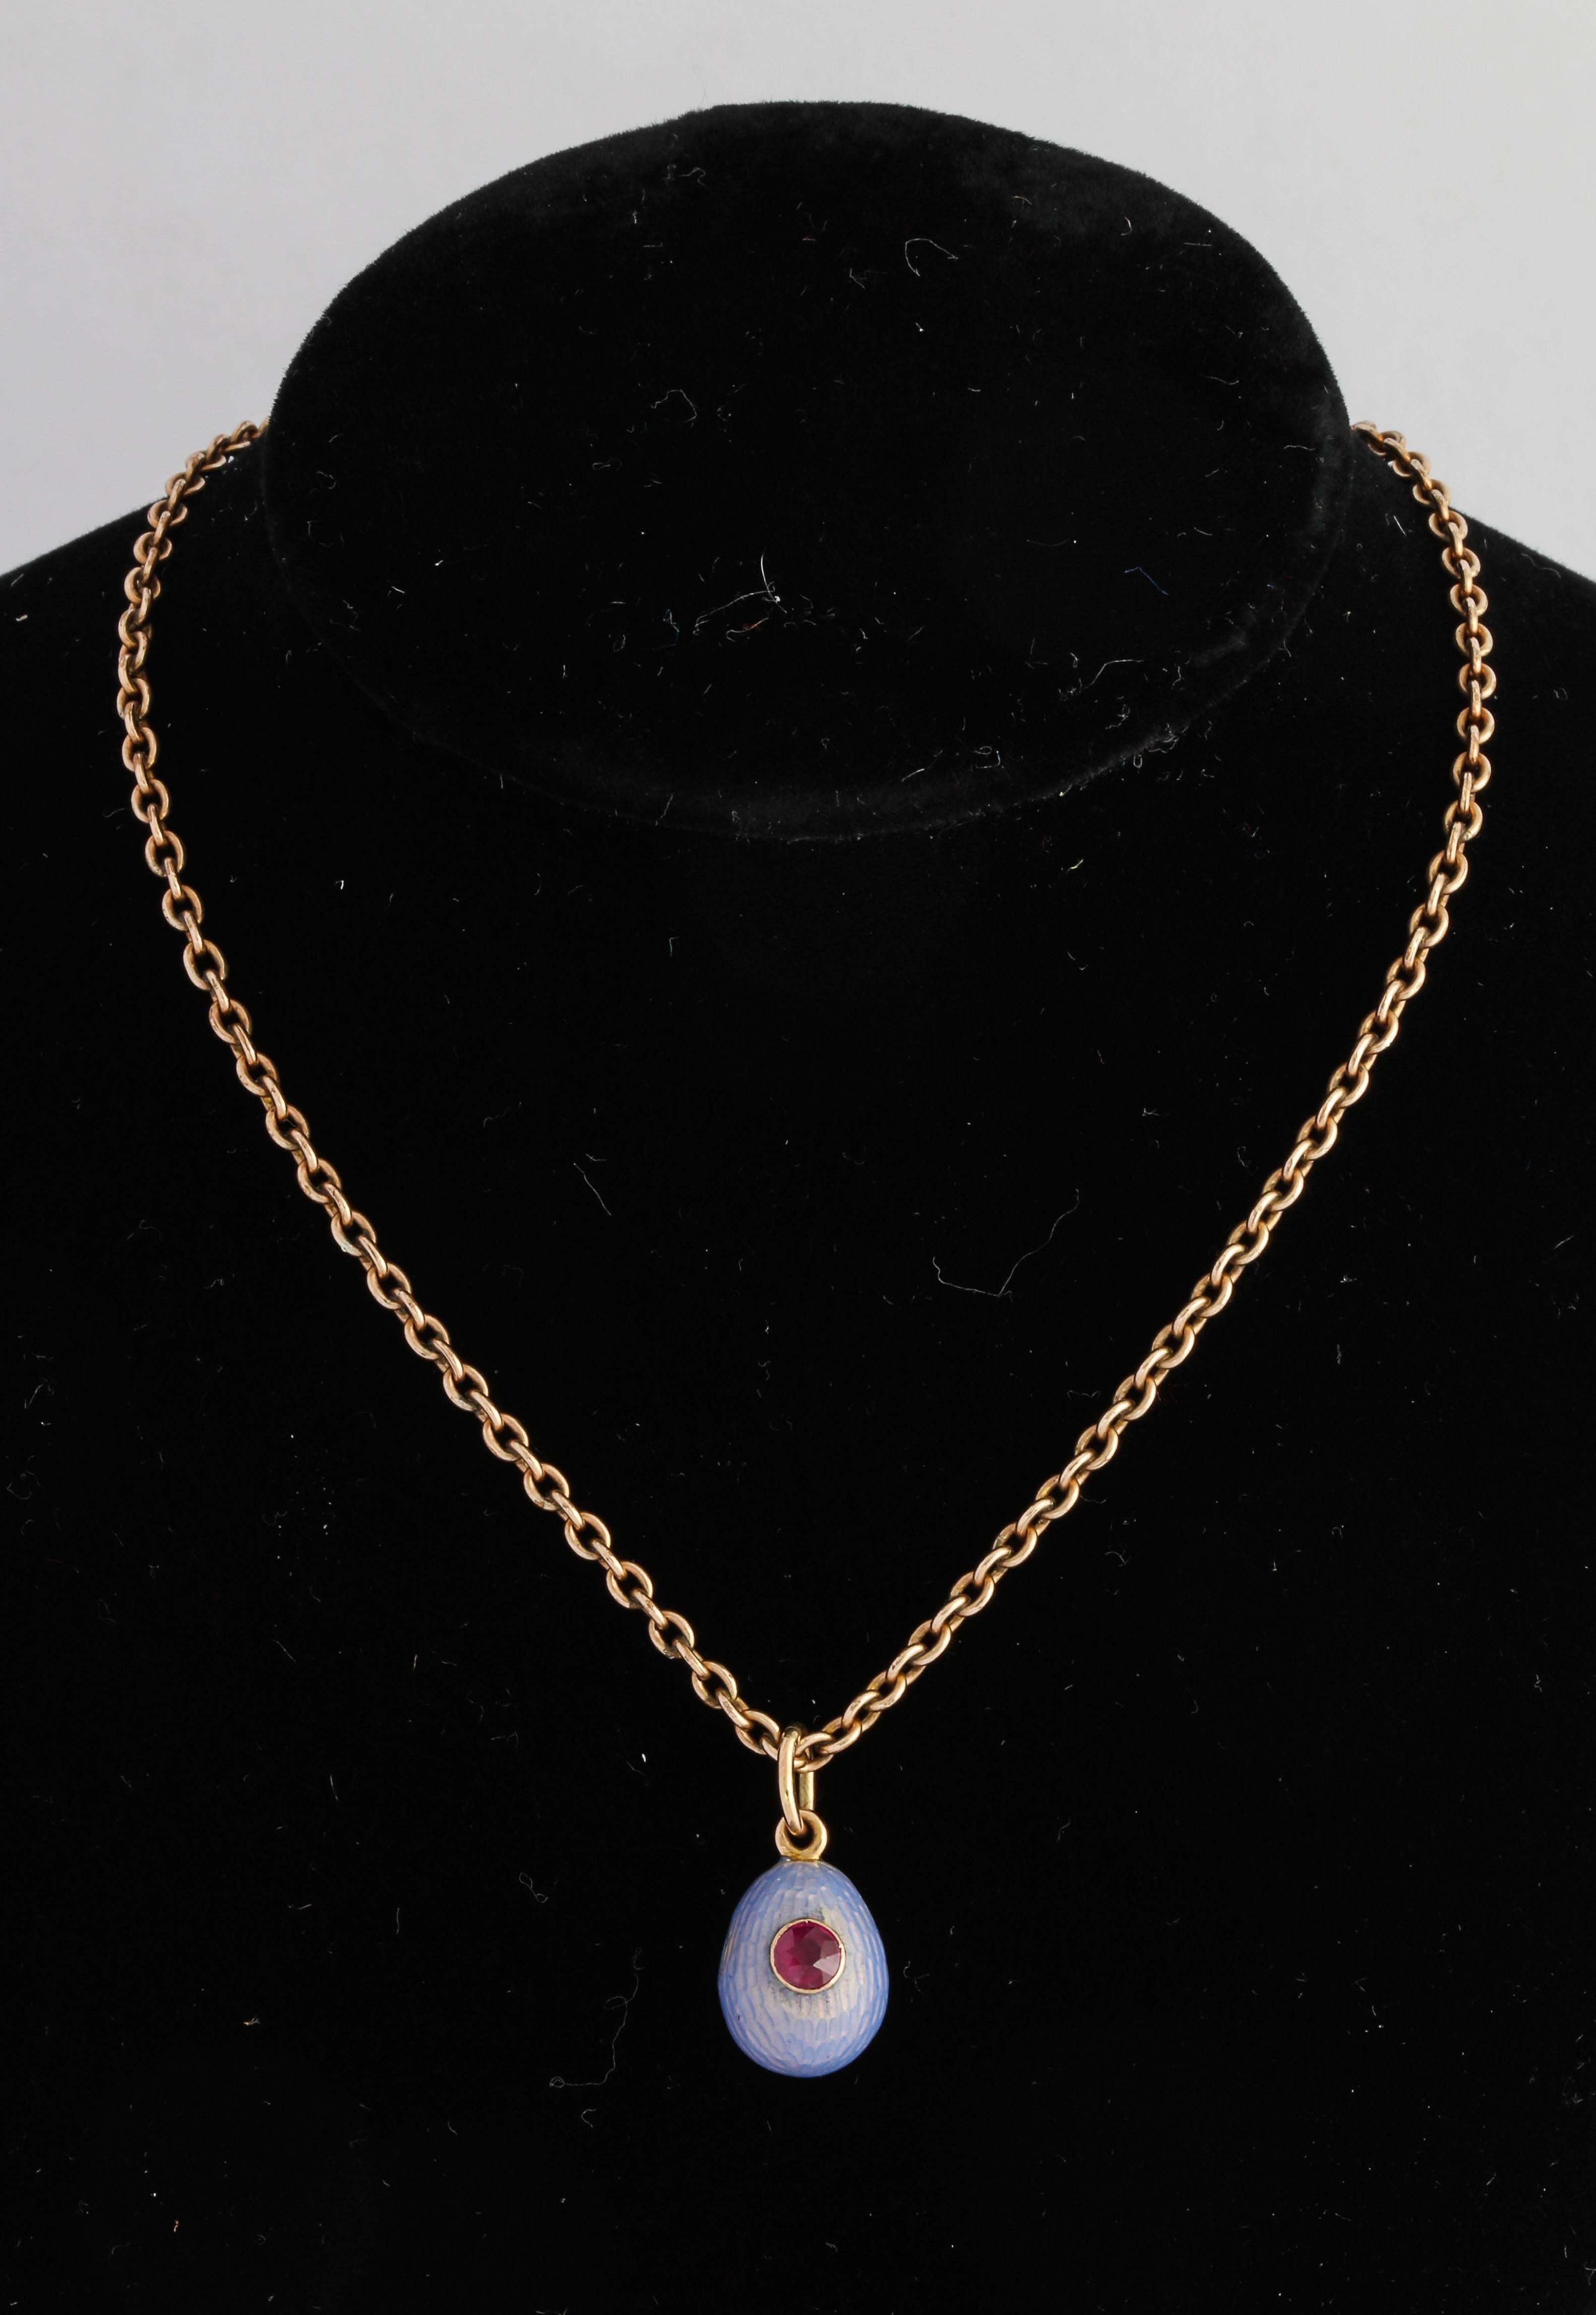 Set with a circular-cut ruby, surrounded by light blue translucent enamel on a gold ground, attached to a gold suspension ring. Chain not included.